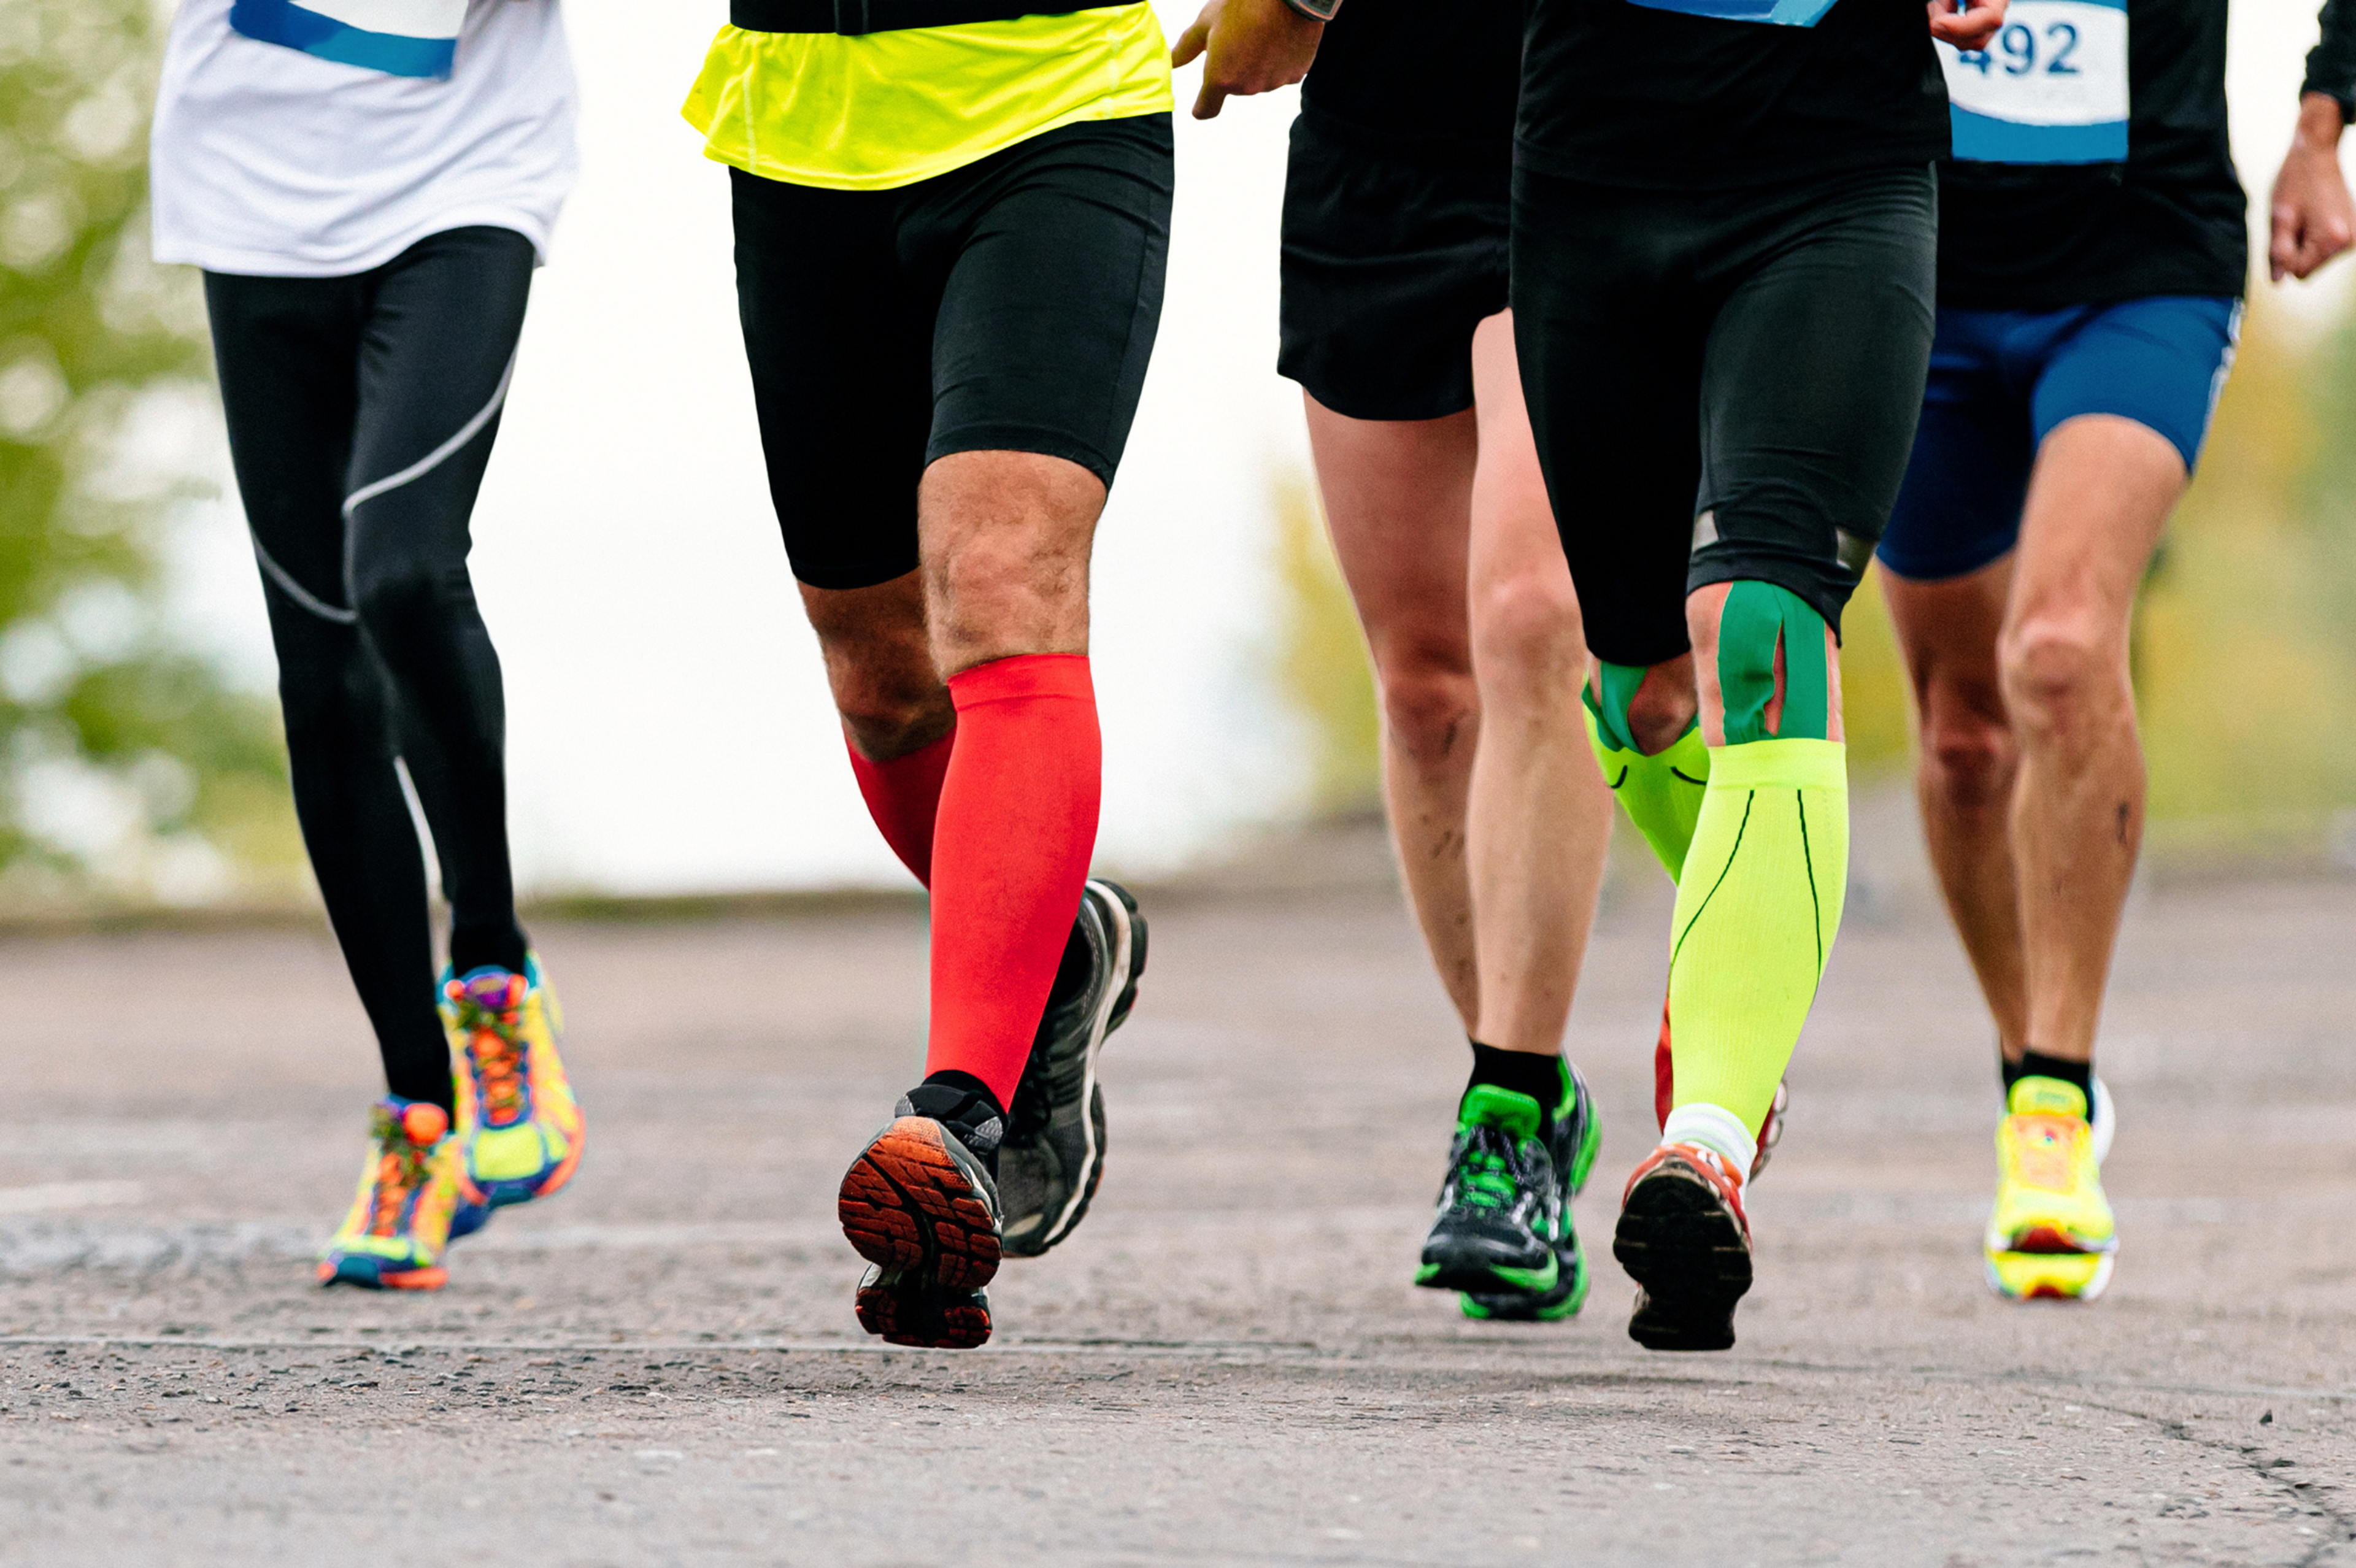 Calf compression sleeves and socks can reduce muscle oscillations during walking and running.